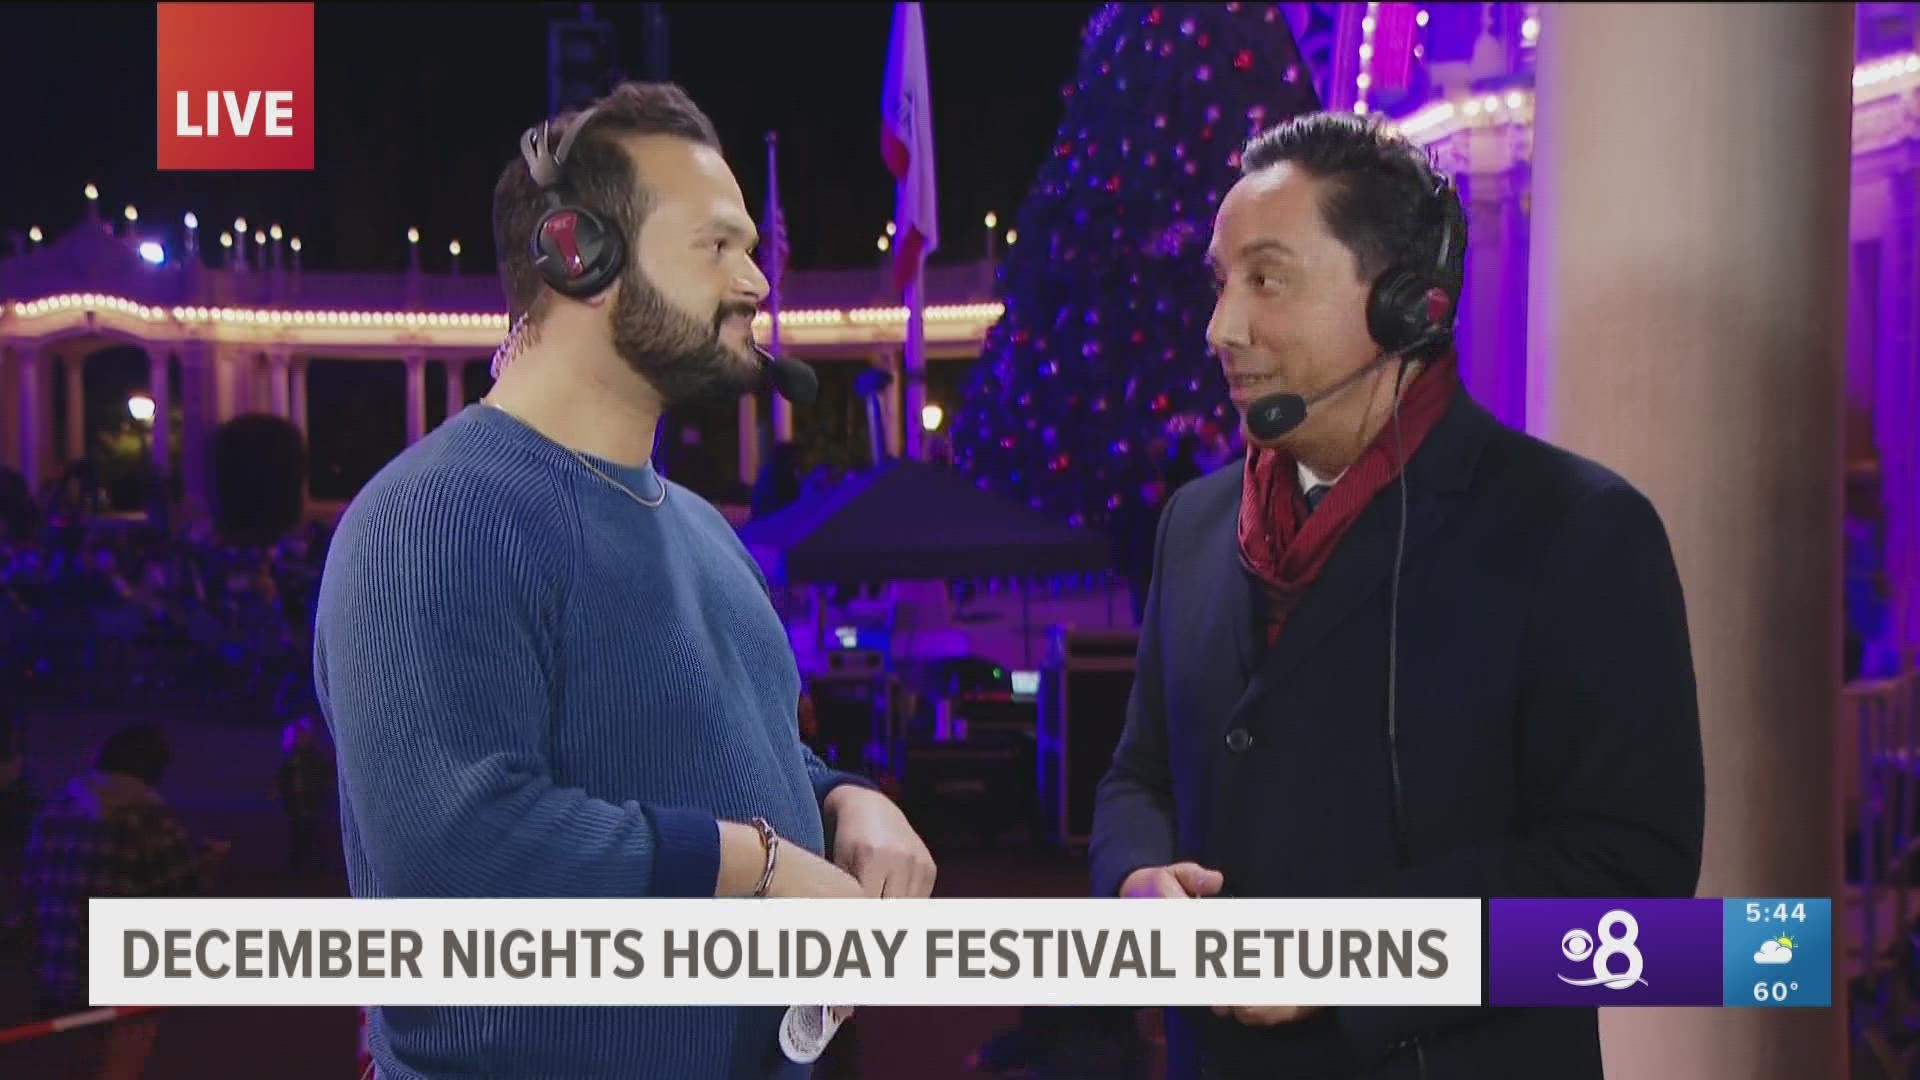 December Nights was held Balboa Park Dec. 2-3 and CBS 8 was there for the official tree lighting.